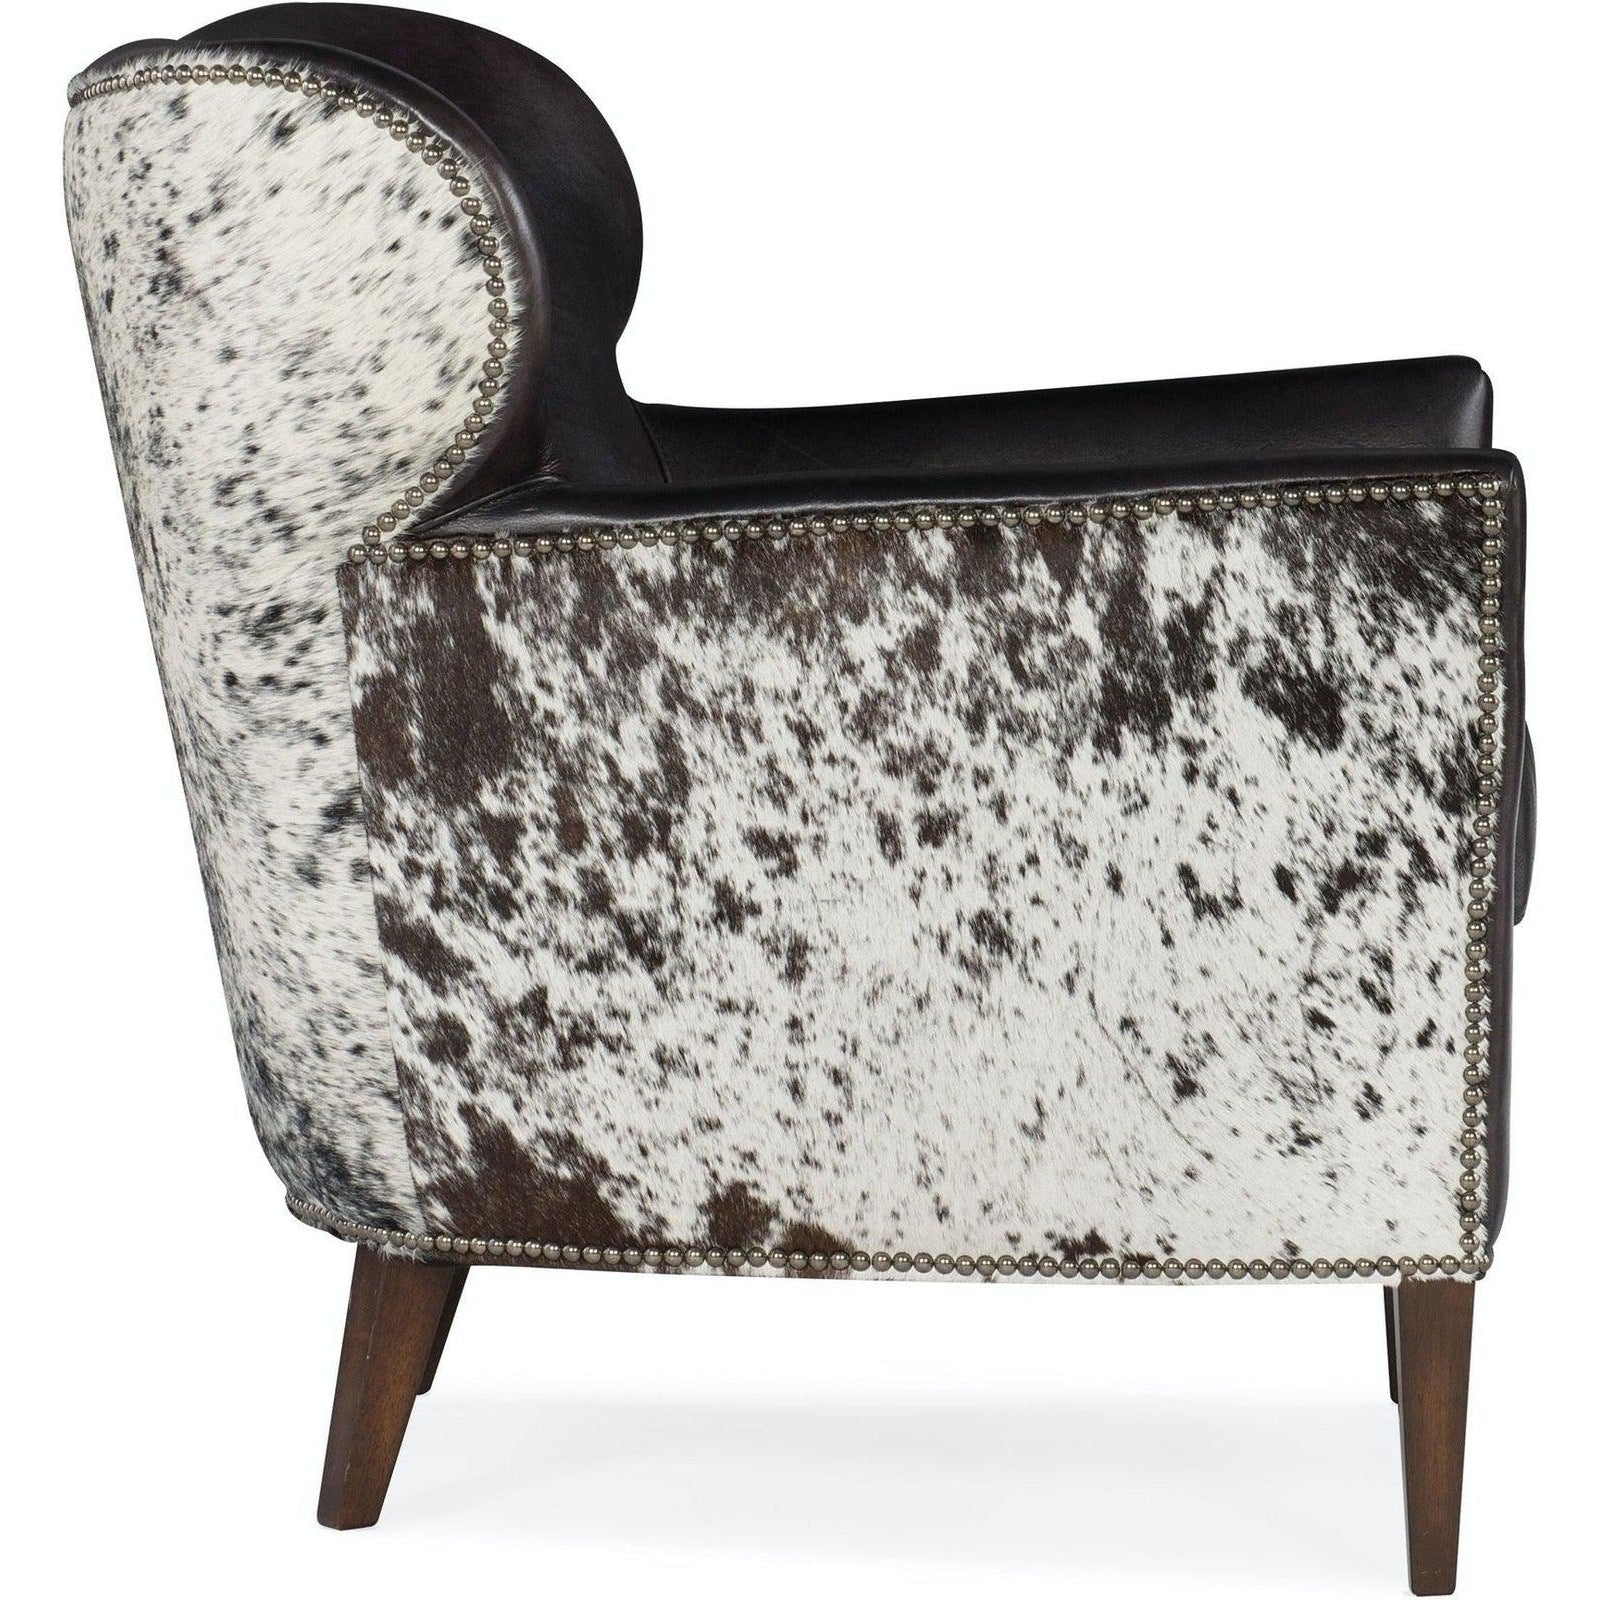 Hooker Furniture Kato Leather Club Chair